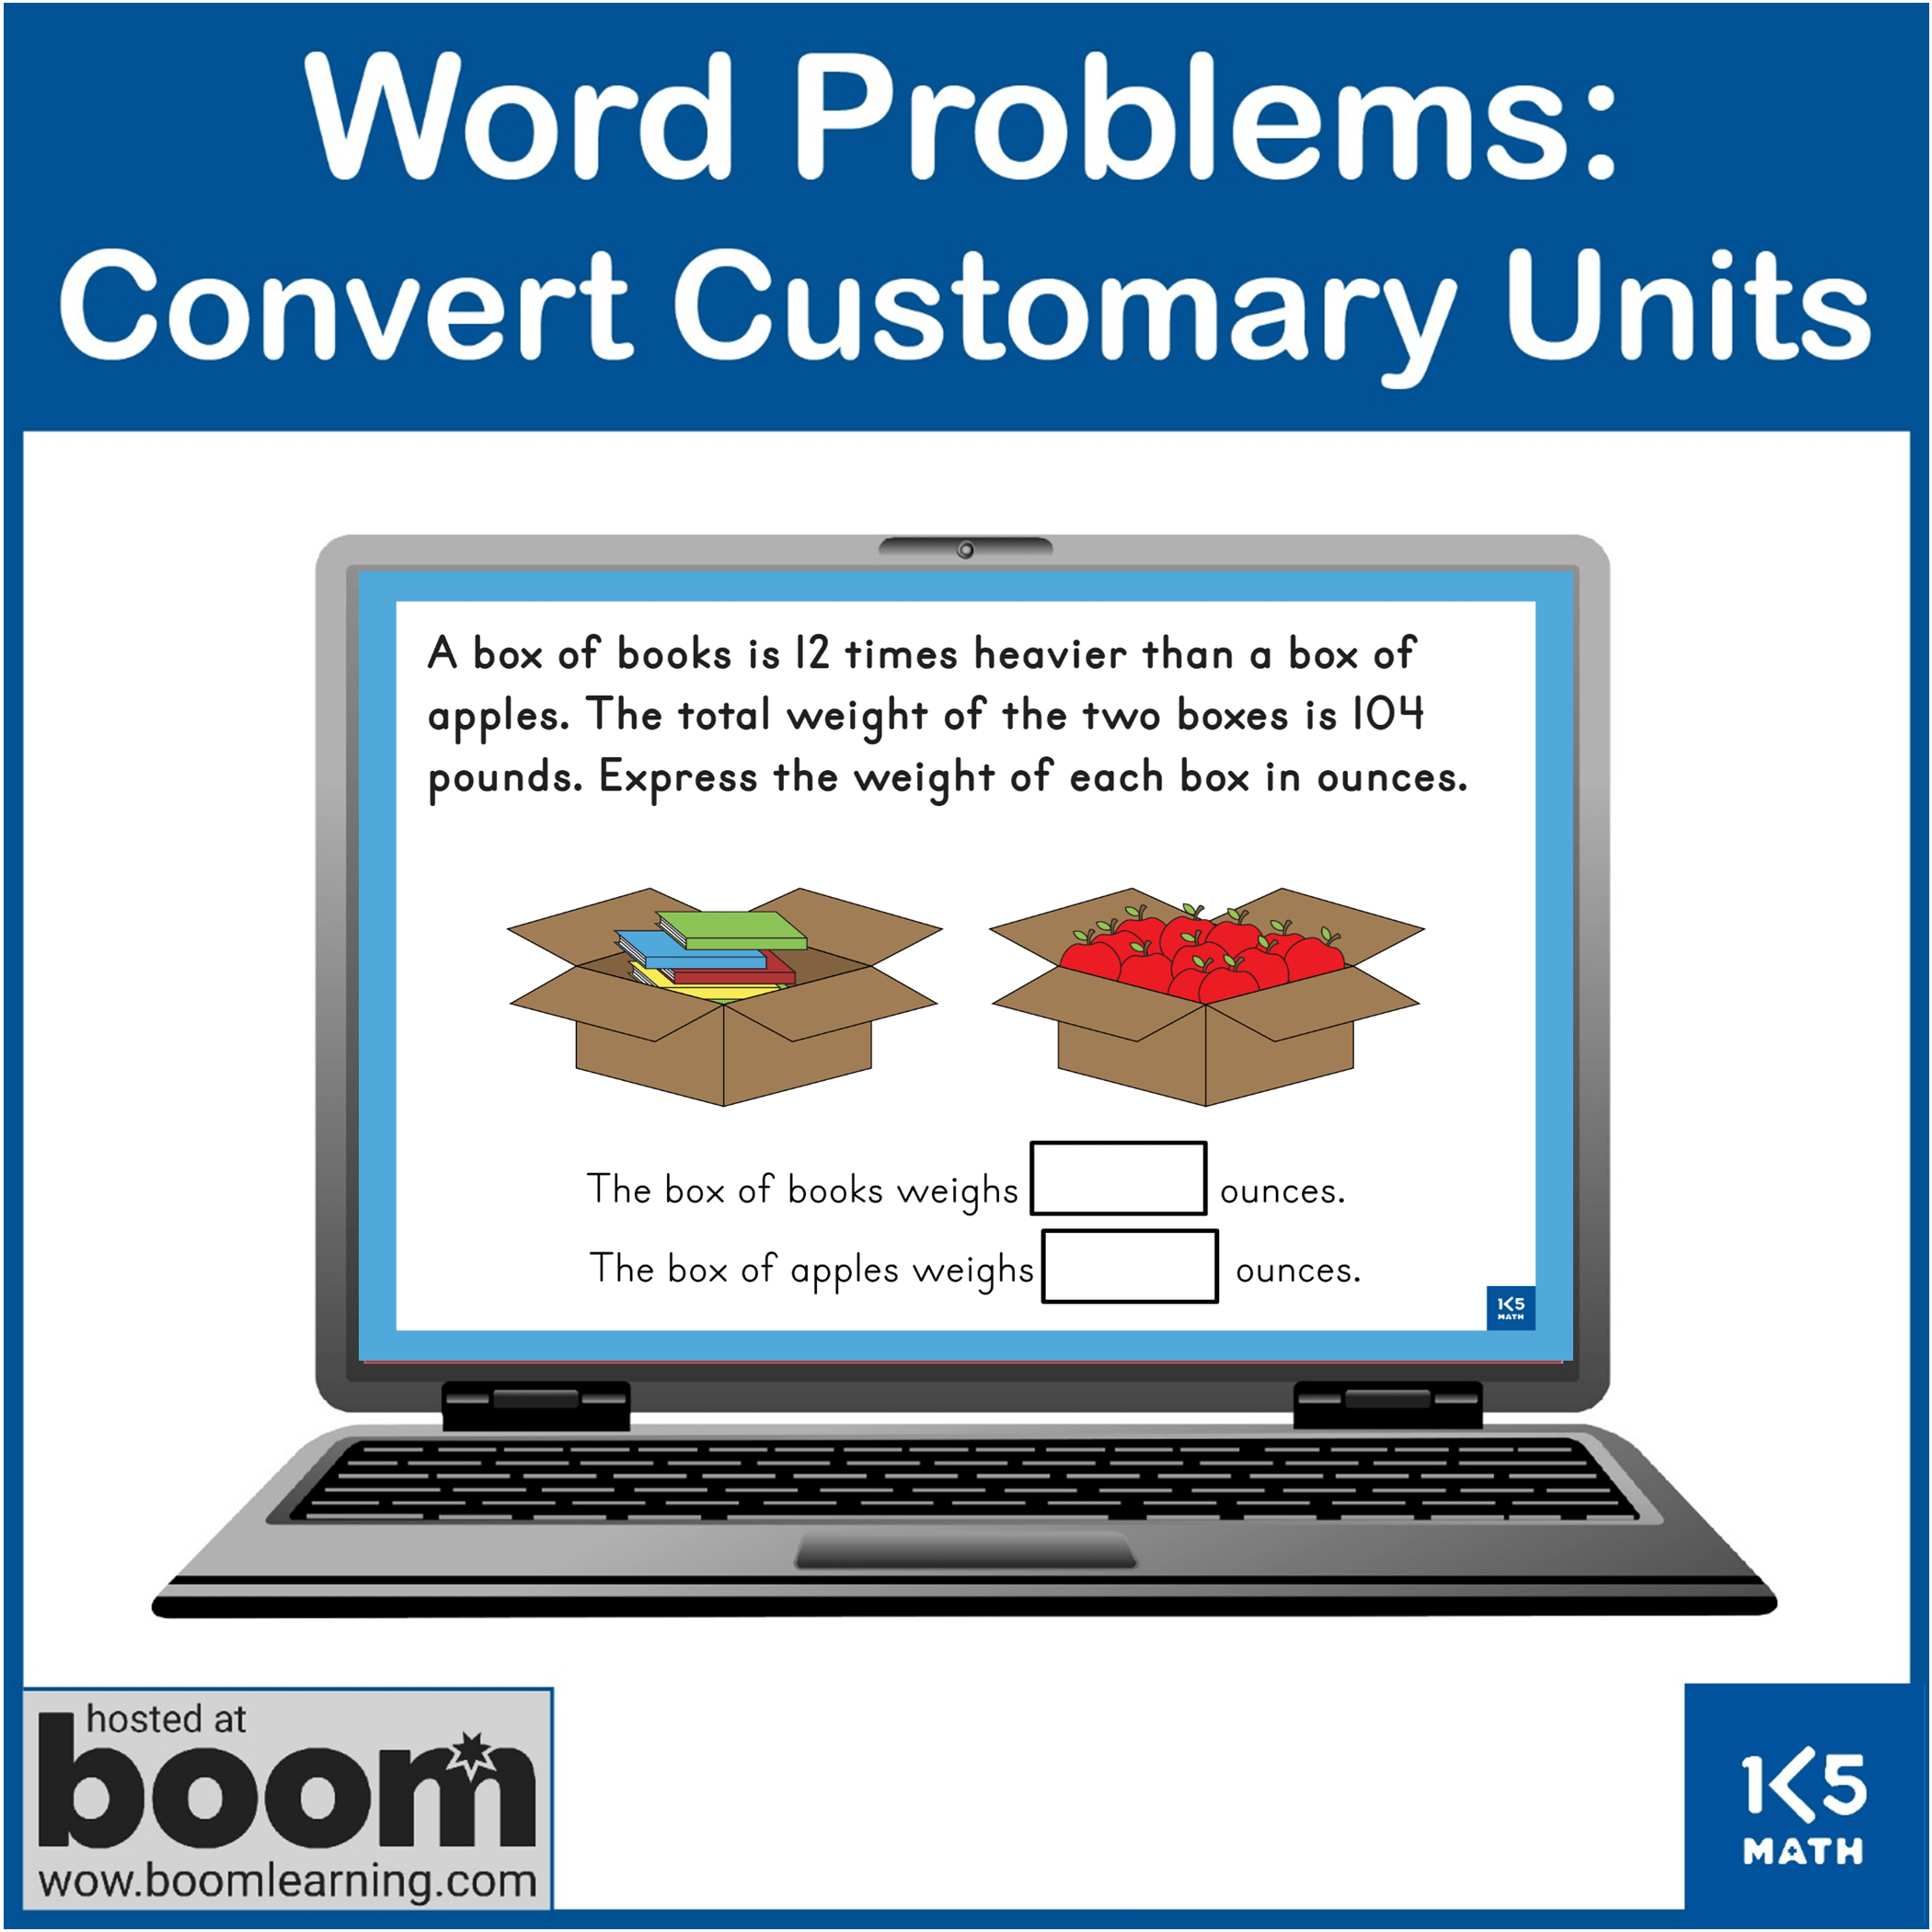 Boom Cards: Convert Customary Units Word Problems